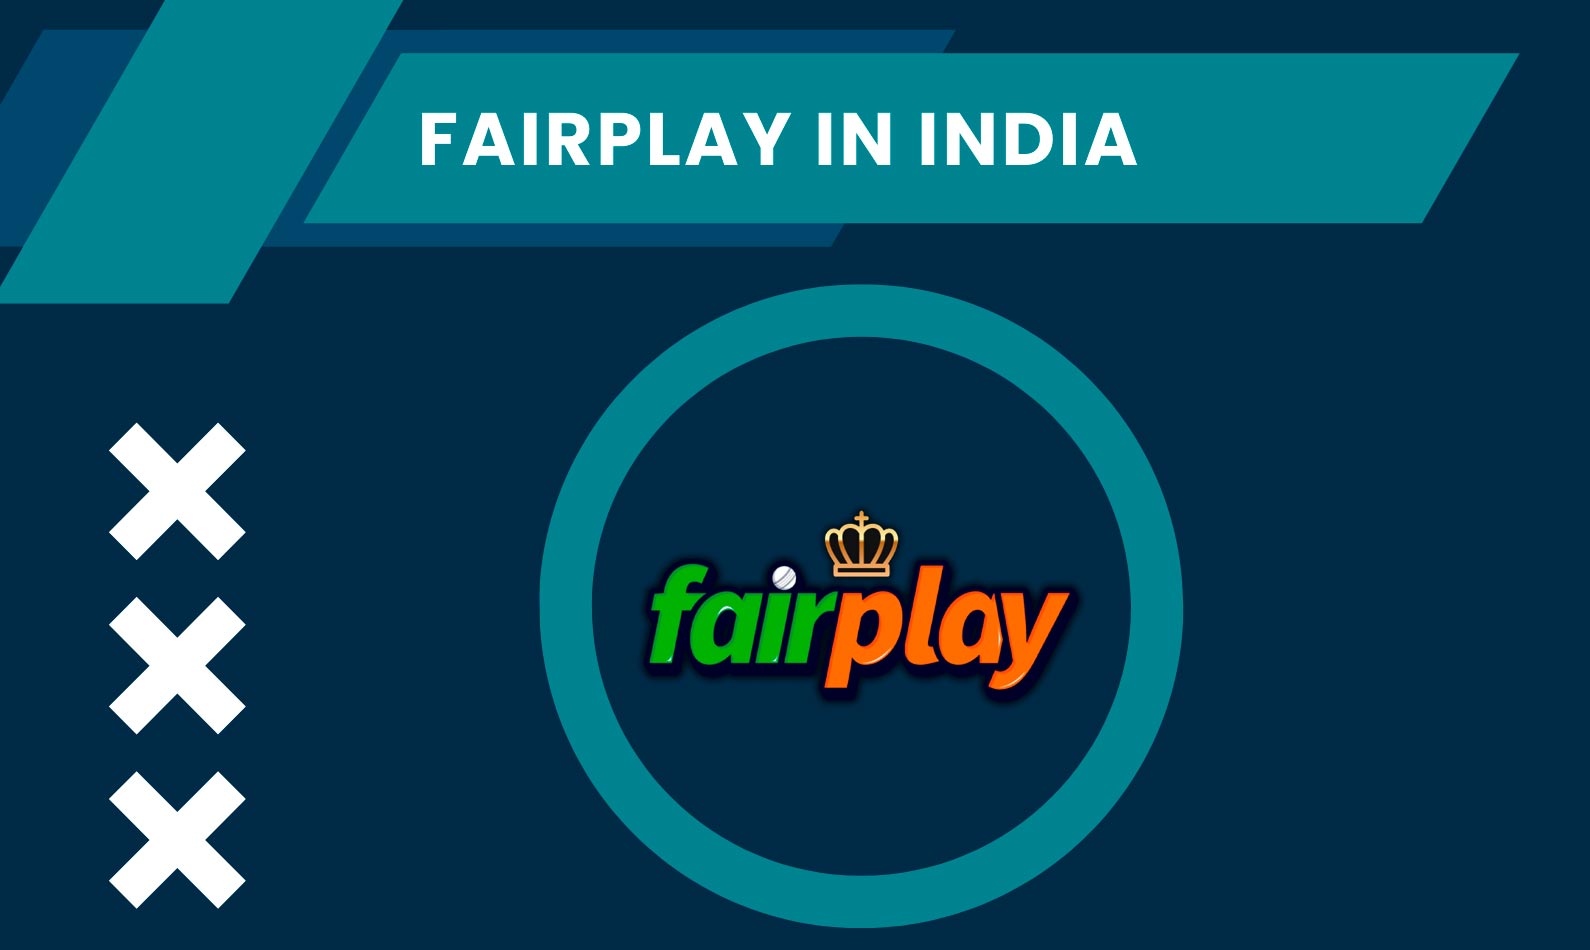 About FairPlay India